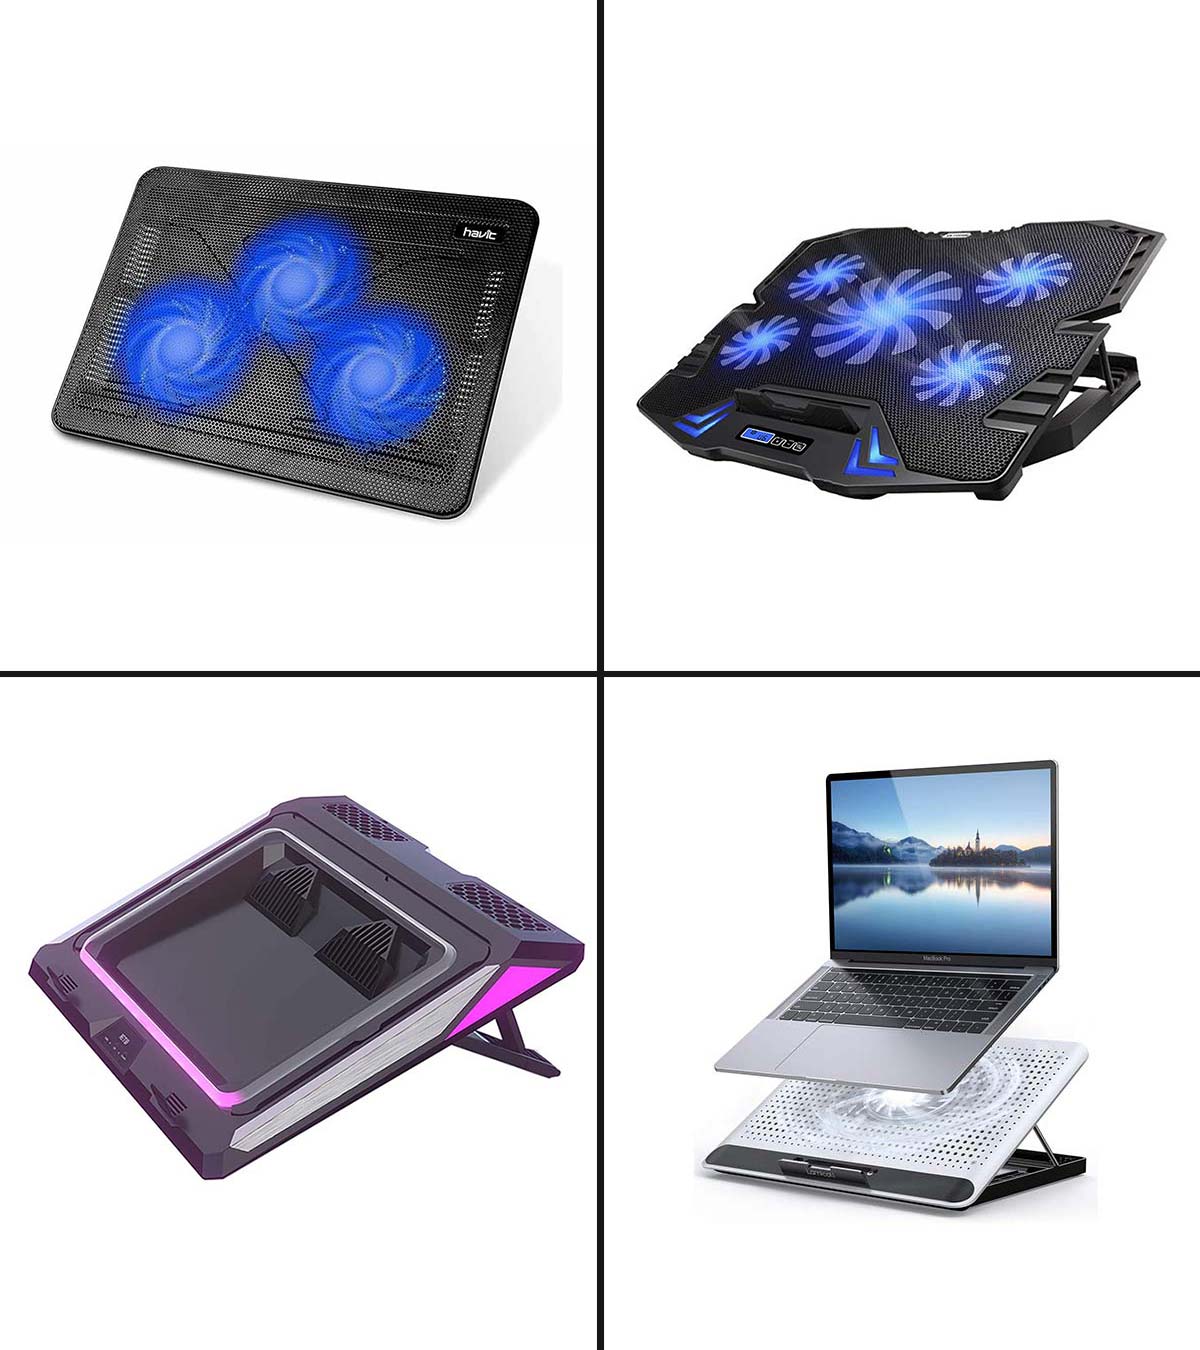 New Adjustable USB Notebook Cooling Cooler Laptop Stand IS930 Black 15 inches 